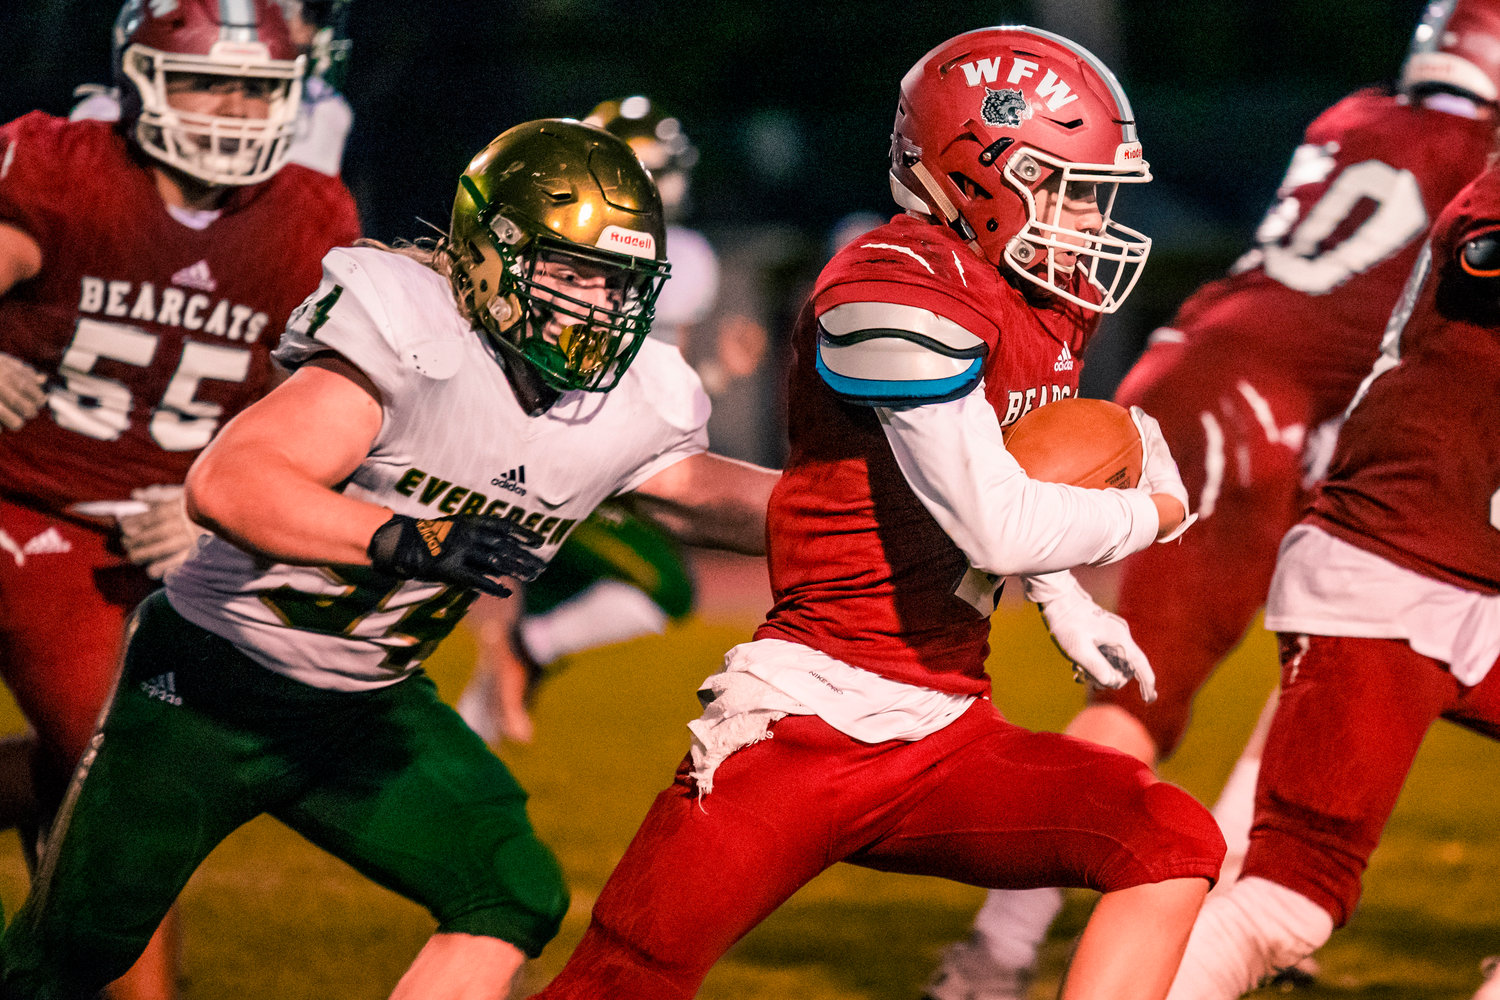 W.F. West’s Jacob Fuller (2) runs with the football during a game against Evergreen at Bearcat Stadium in Chehalis under Friday night lights.